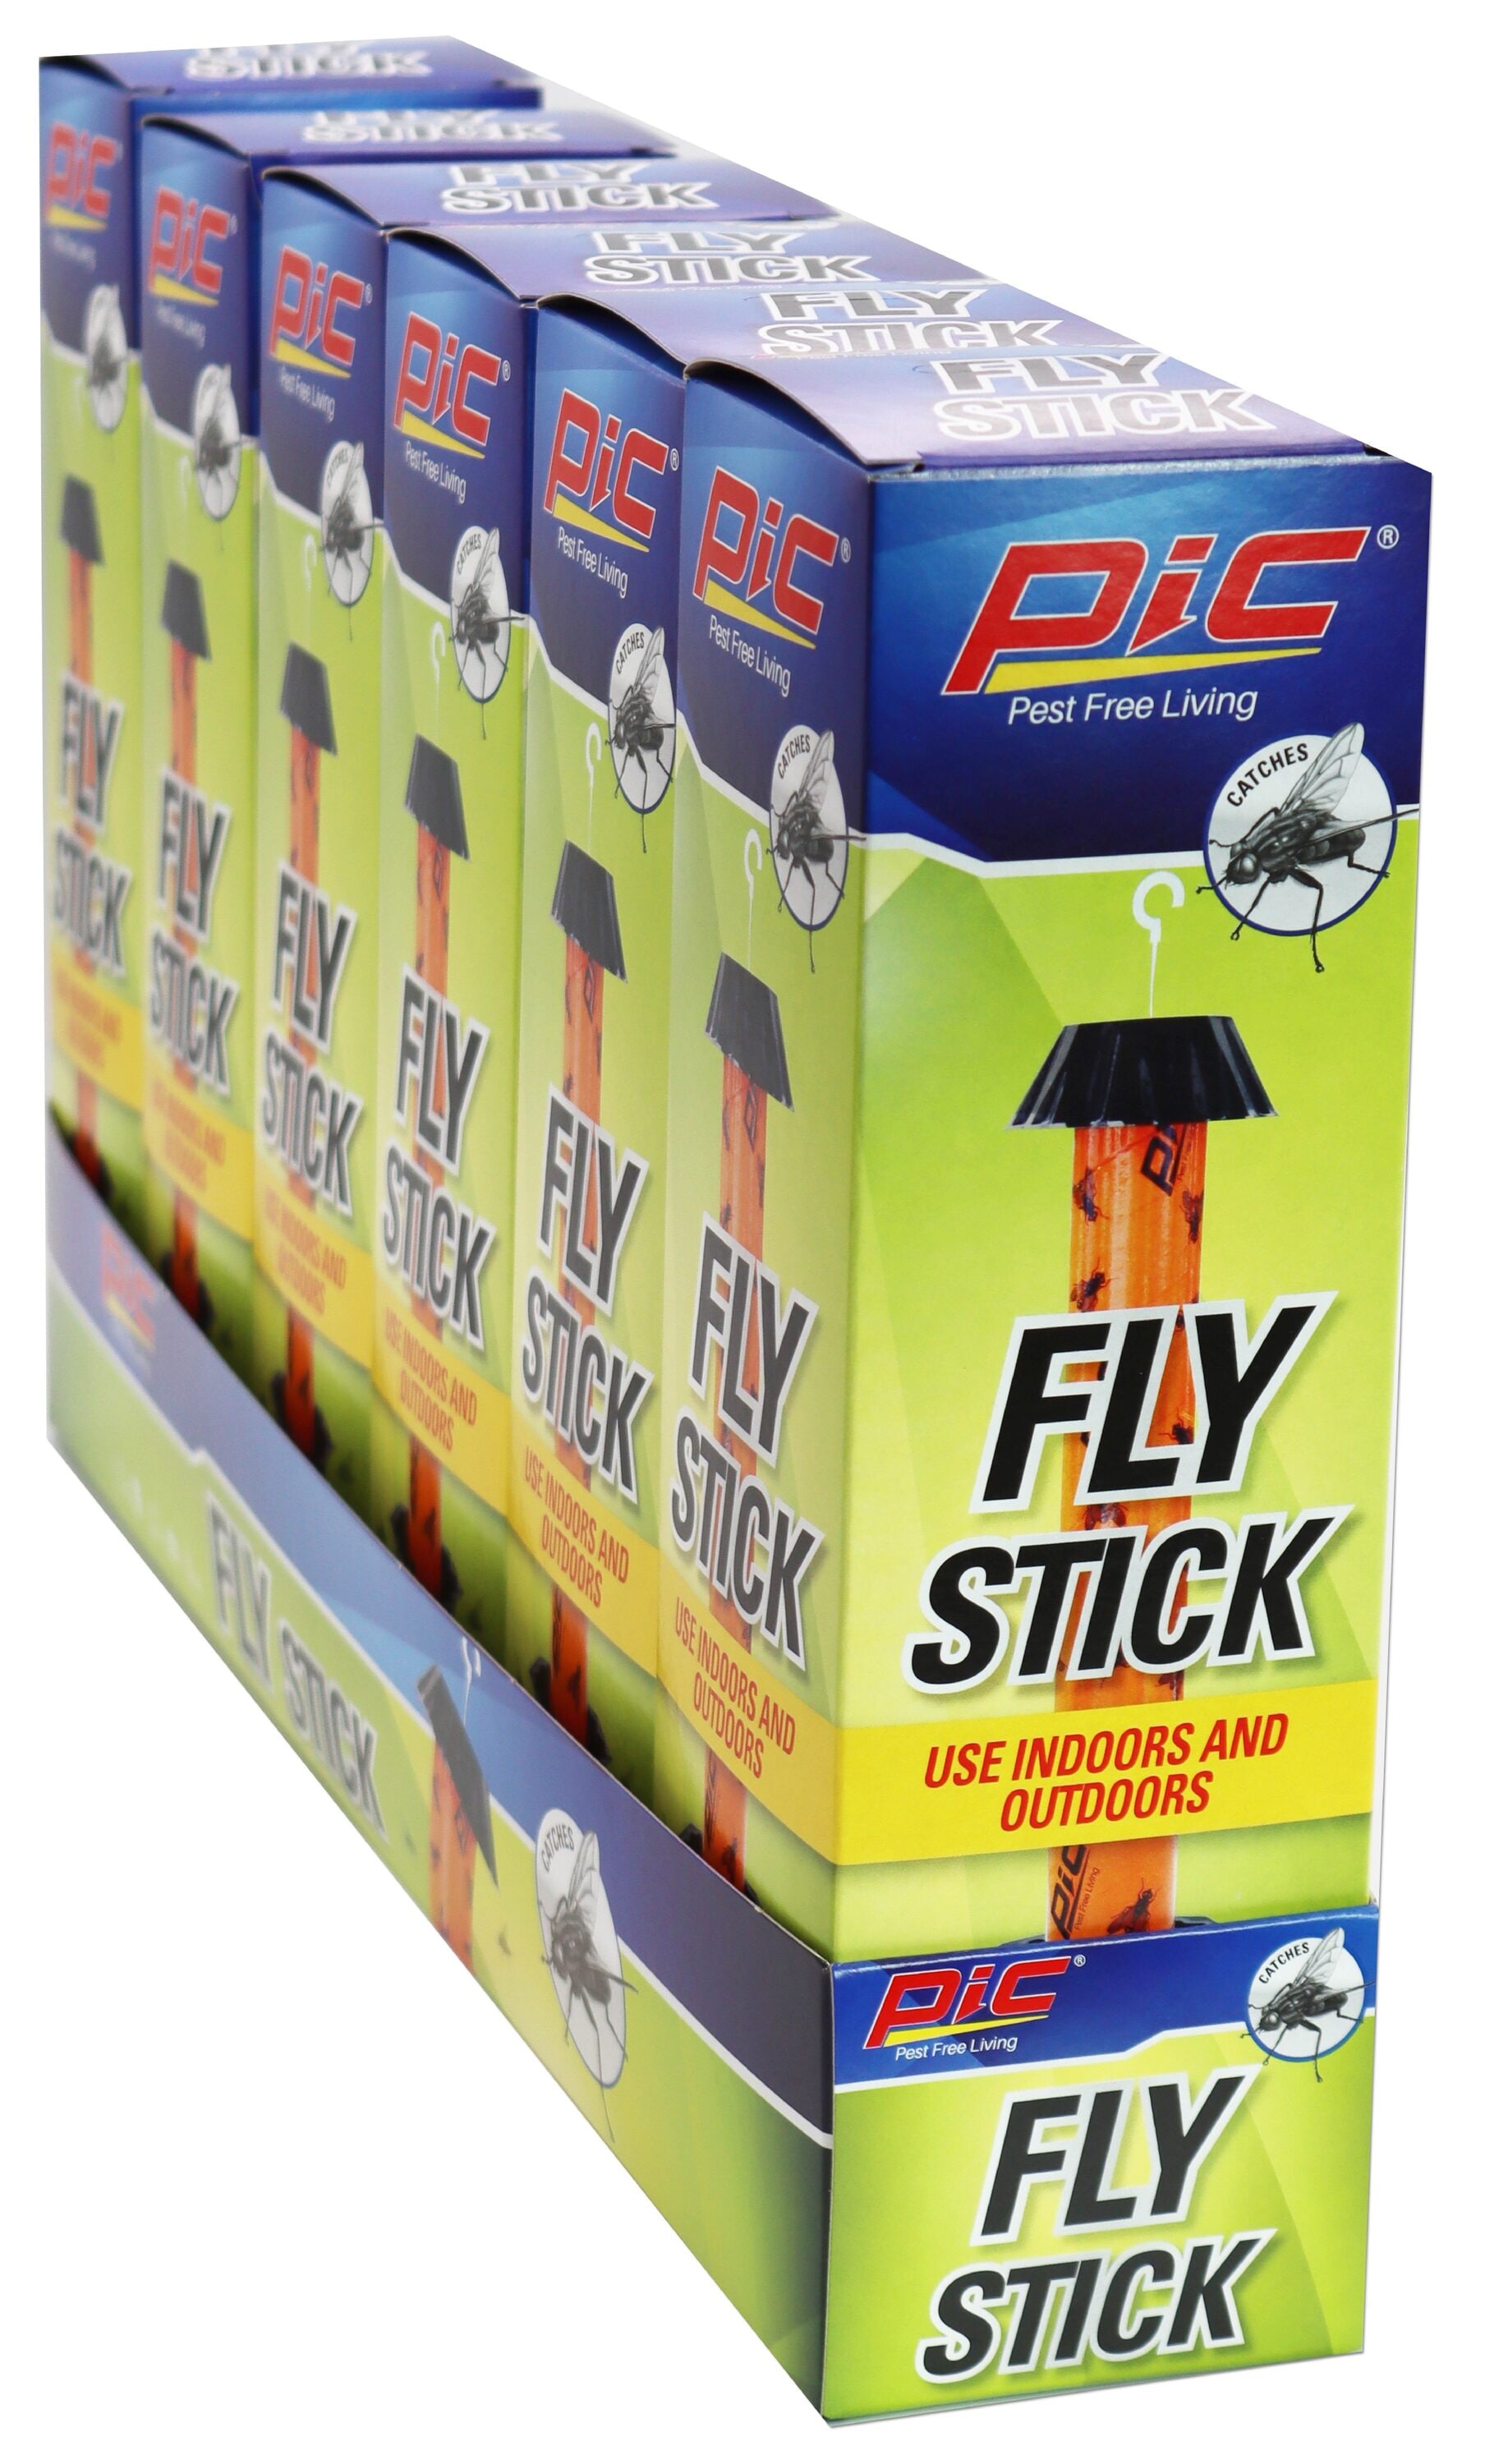 24 Pack Sticky Fly Ribbon Strips Tape, Flies Trap Catcher, Gnat Killer  Indoors/Outdoors 